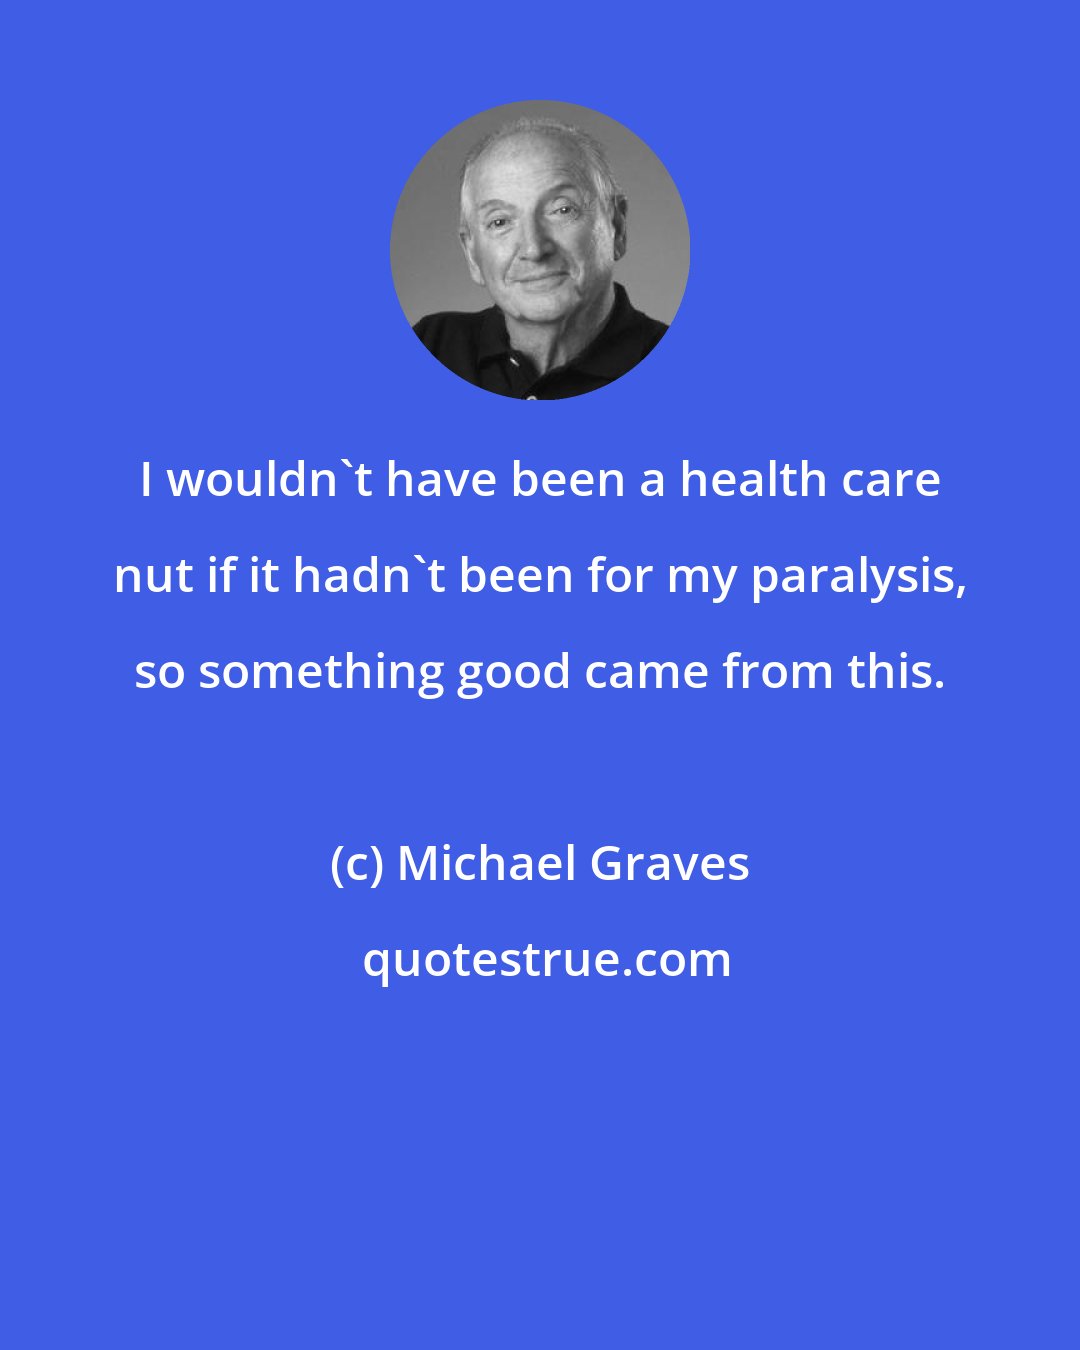 Michael Graves: I wouldn't have been a health care nut if it hadn't been for my paralysis, so something good came from this.